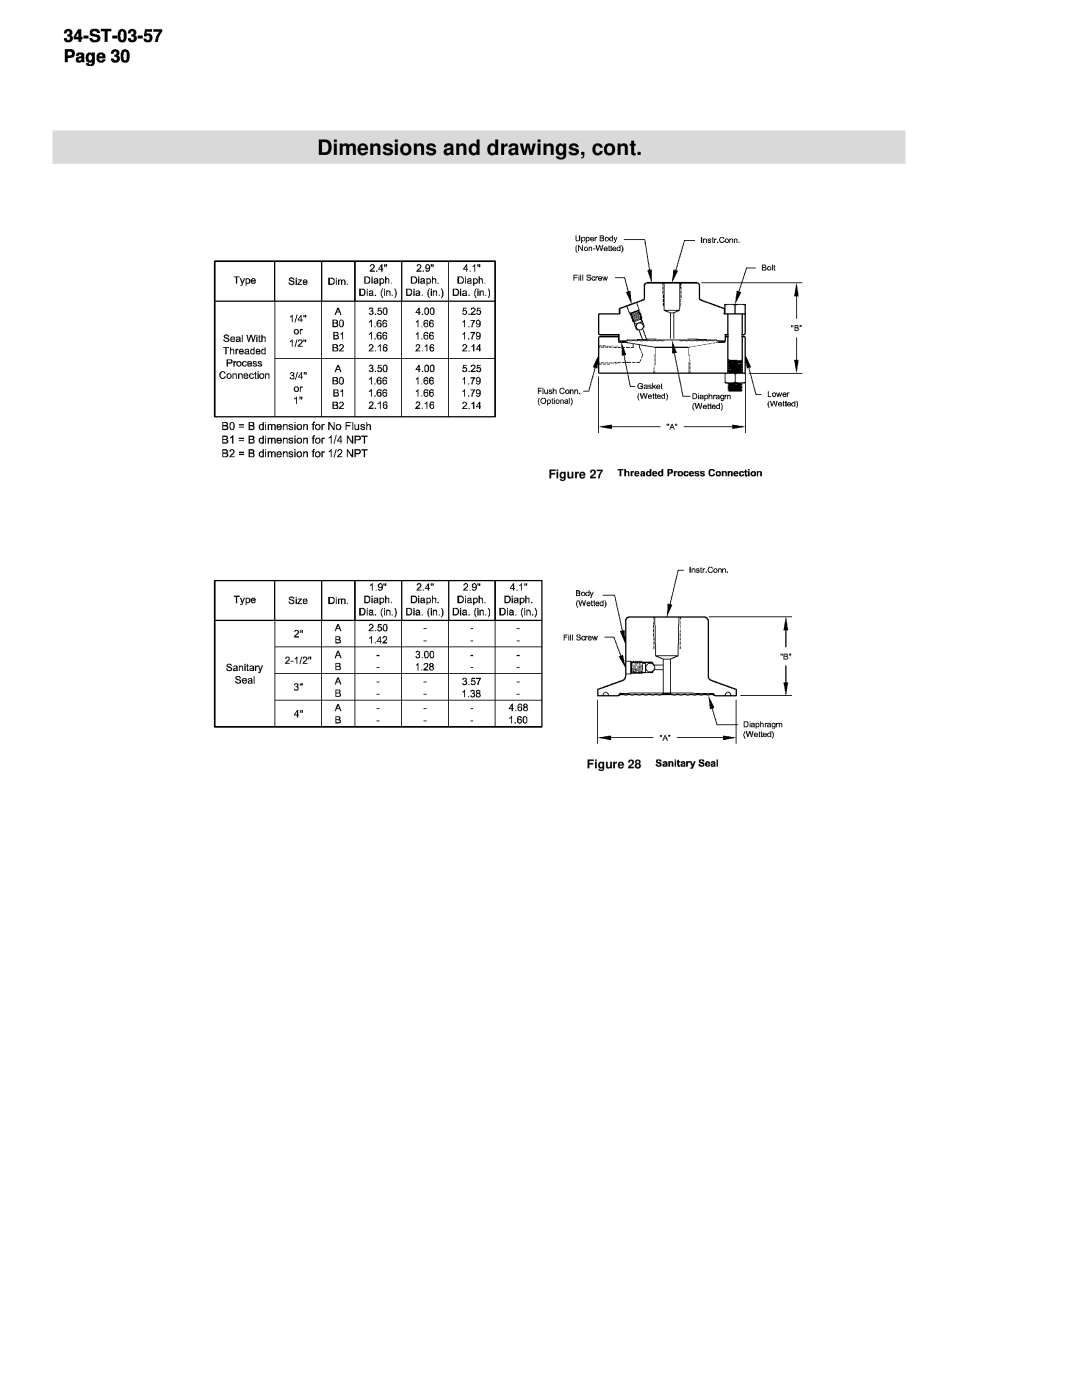 Honeywell STR93D, STR94G manual Dimensions and drawings, cont, 34-ST-03-57Page 